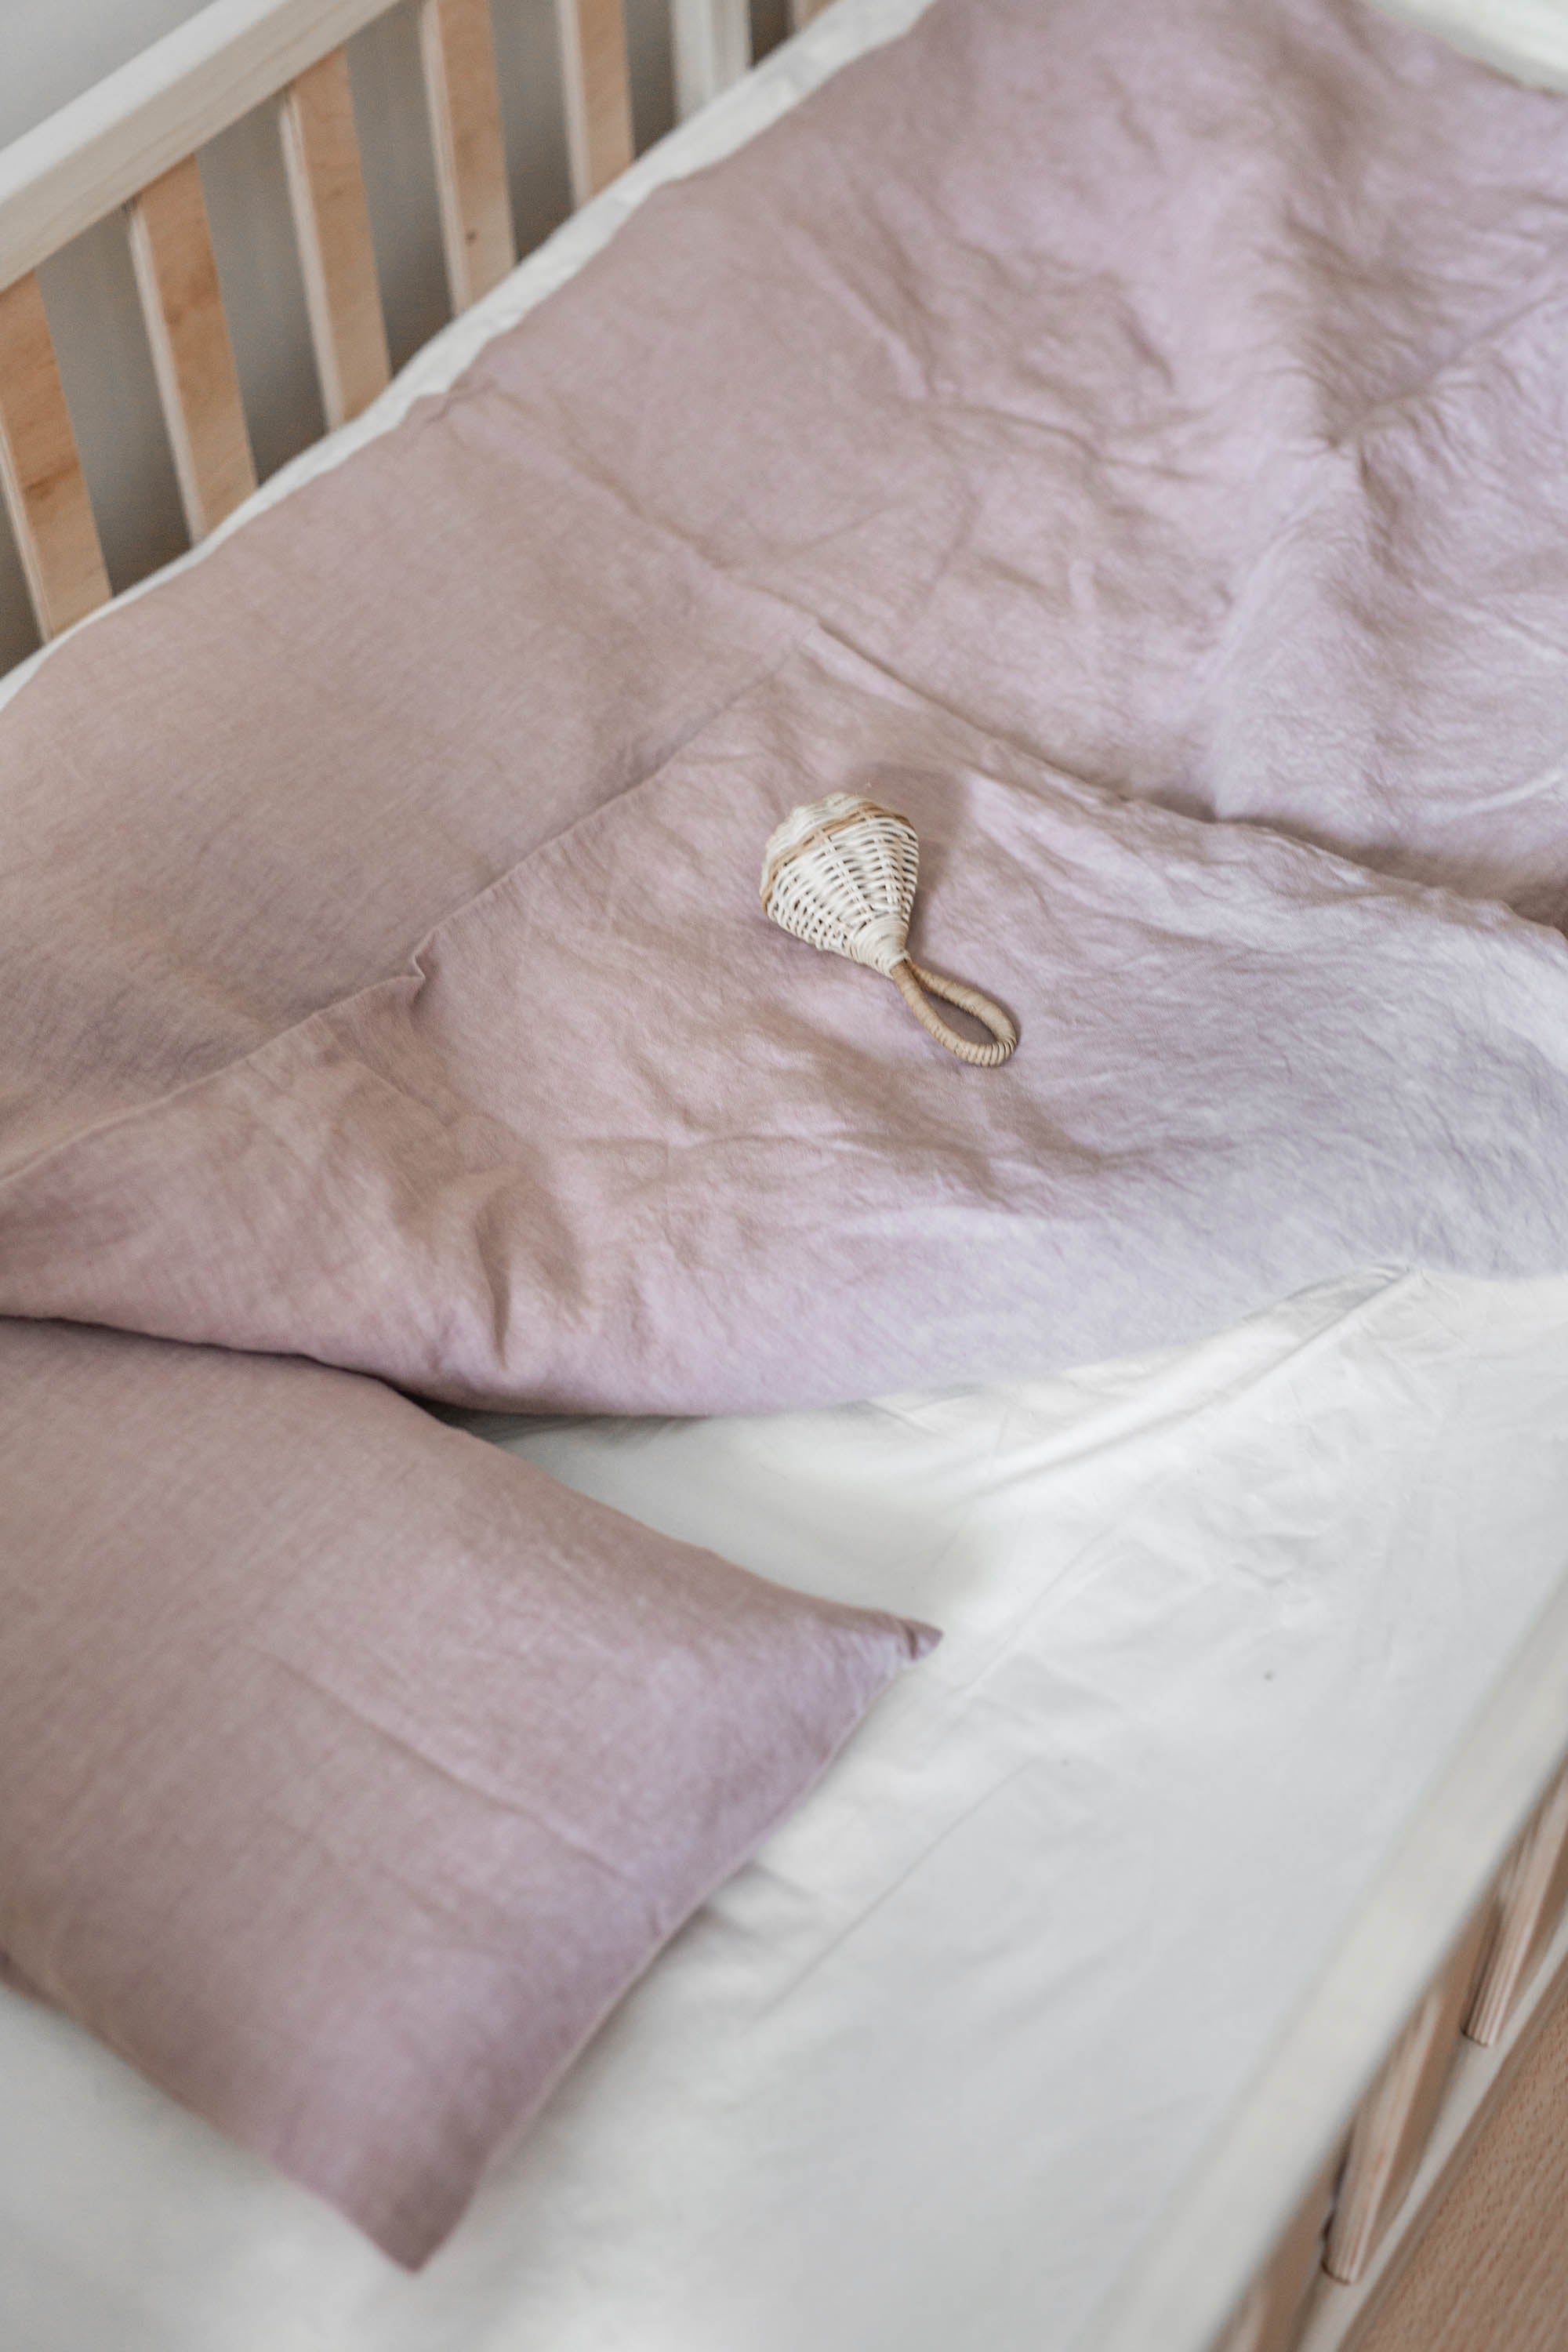 Cotton Candy Linen Baby Bedding By AmourlInen